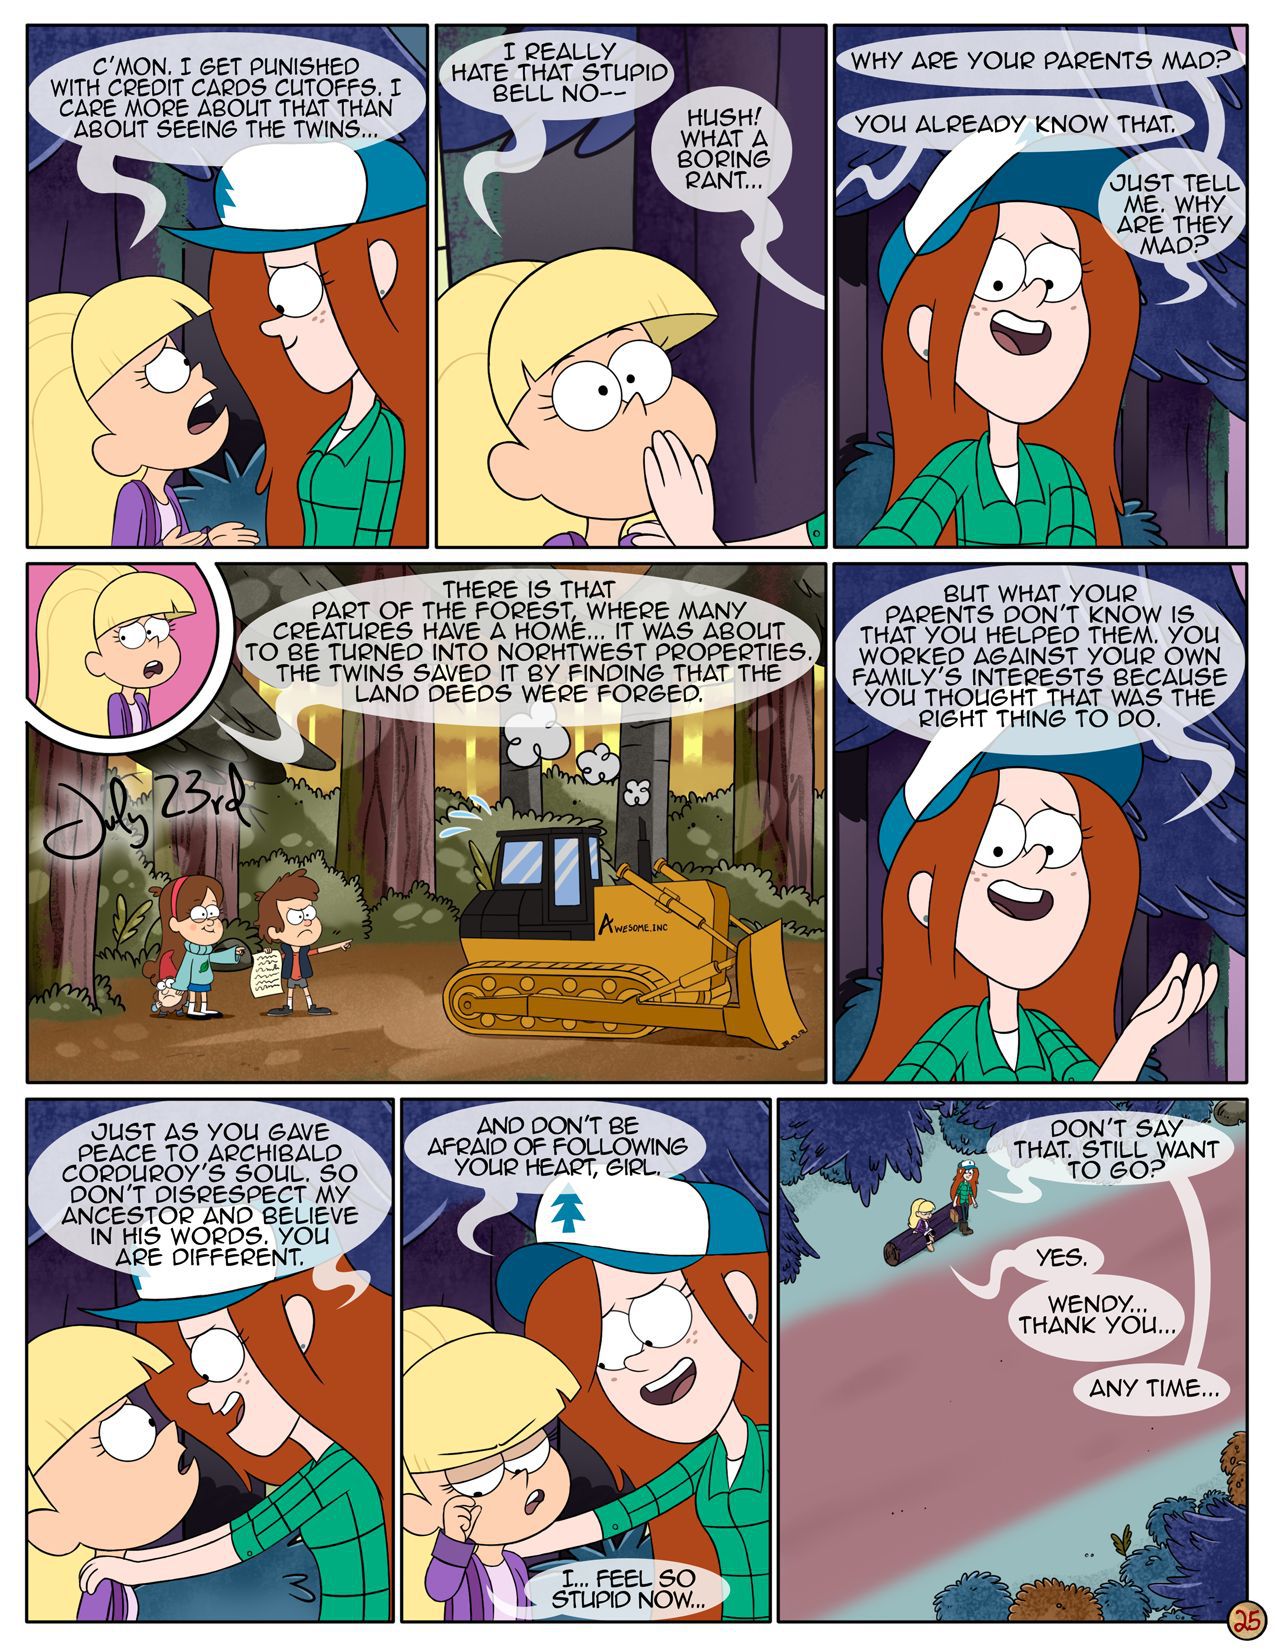 [Area] Next Summer (Gravity Falls) [Ongoing] 26